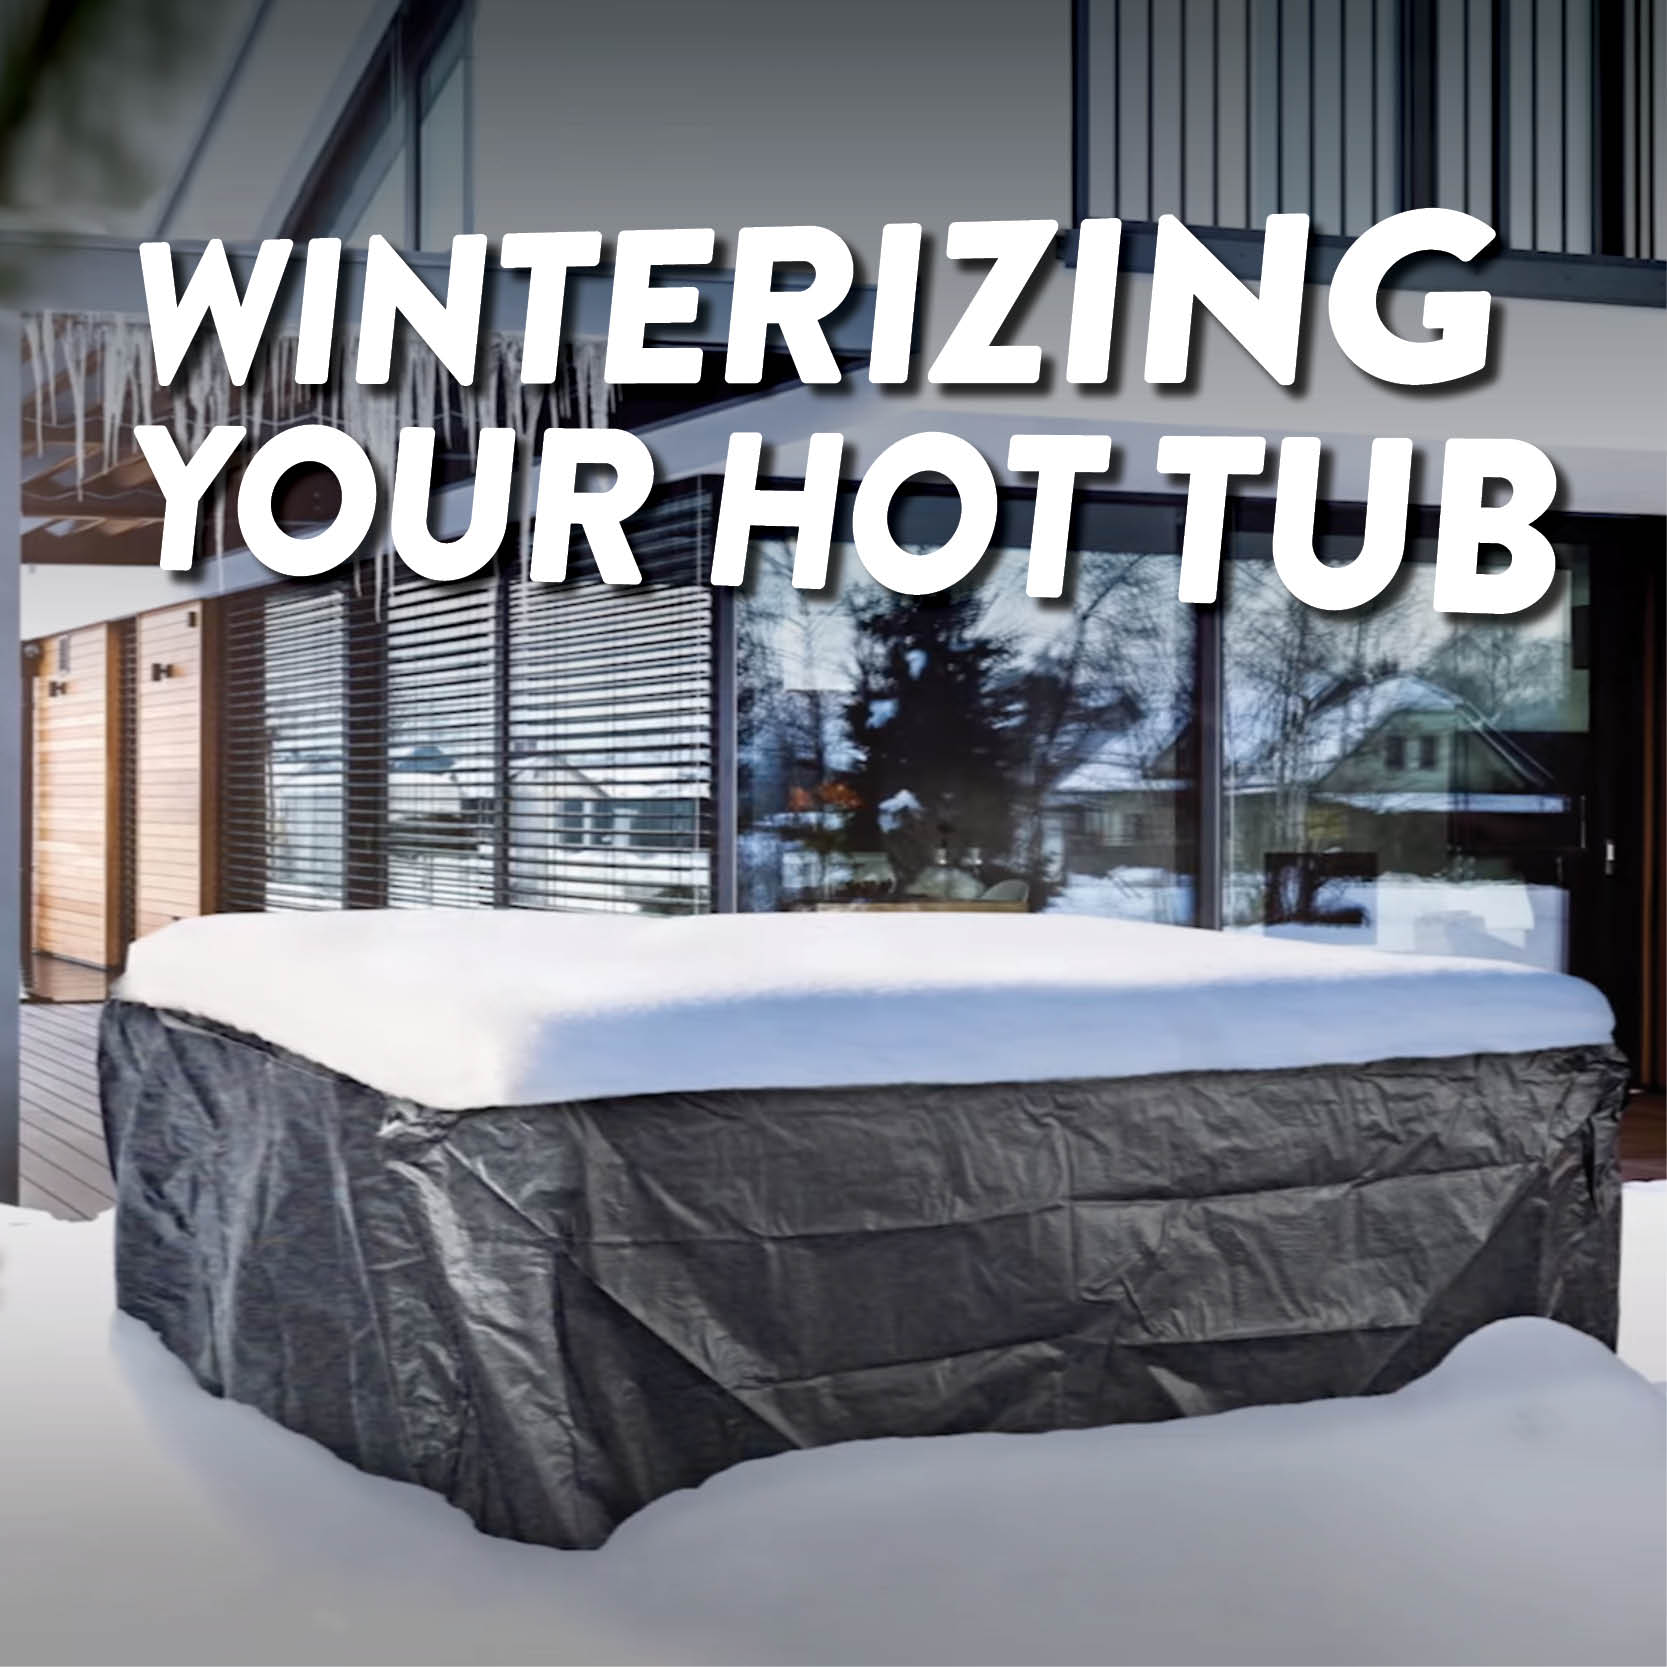 Winterize your hot tub